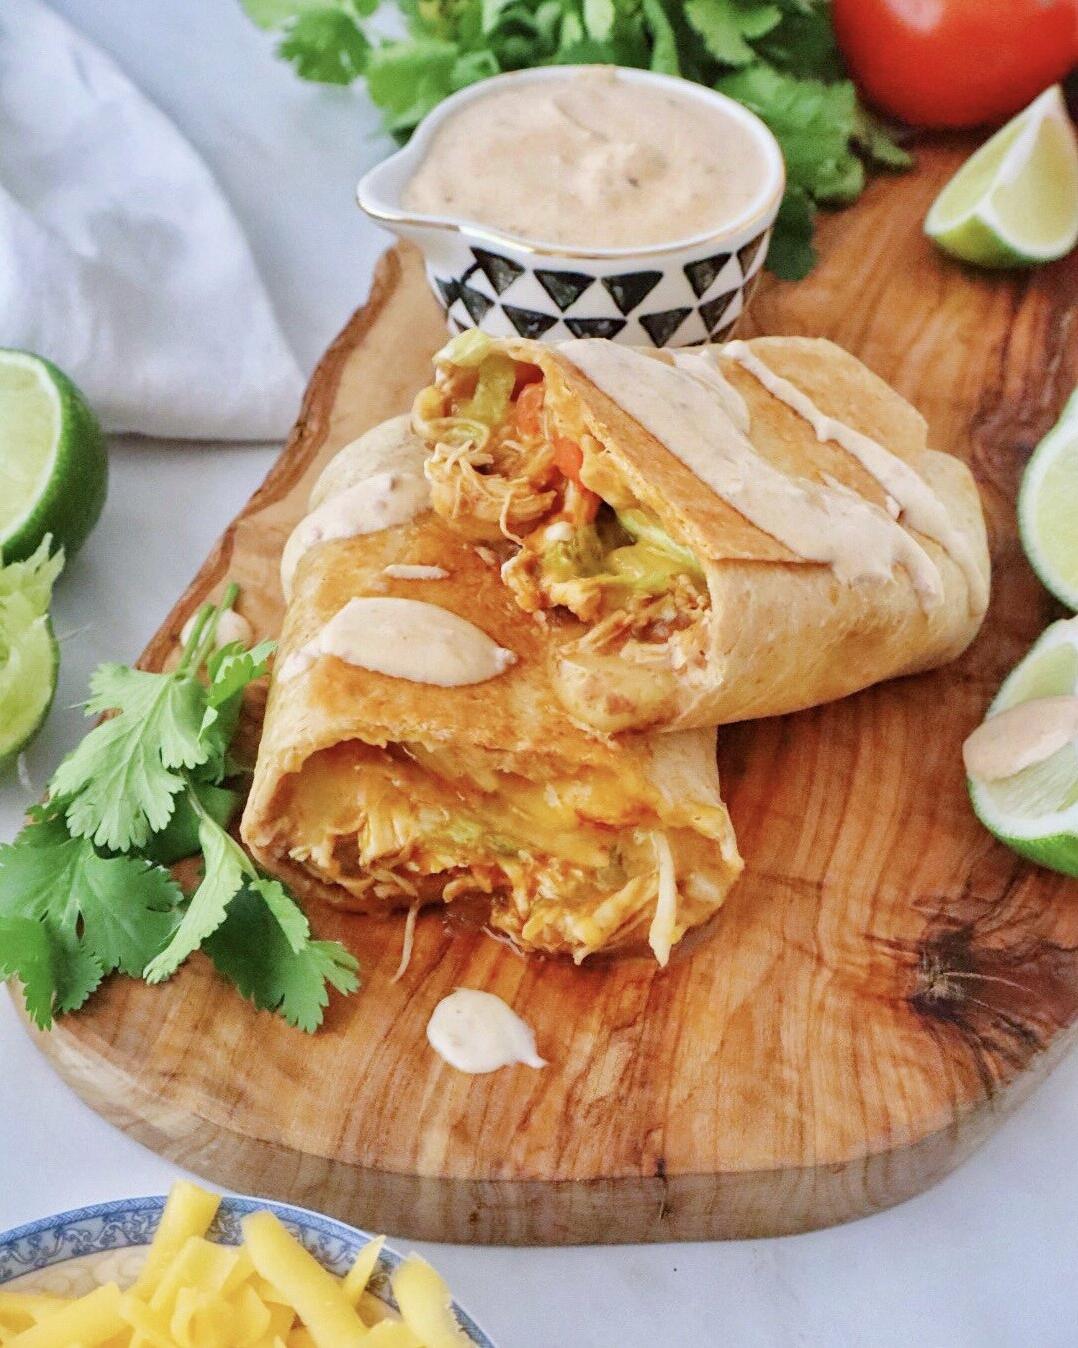  Who says Mexican food can't be crispy? Try these chicken burritos today.